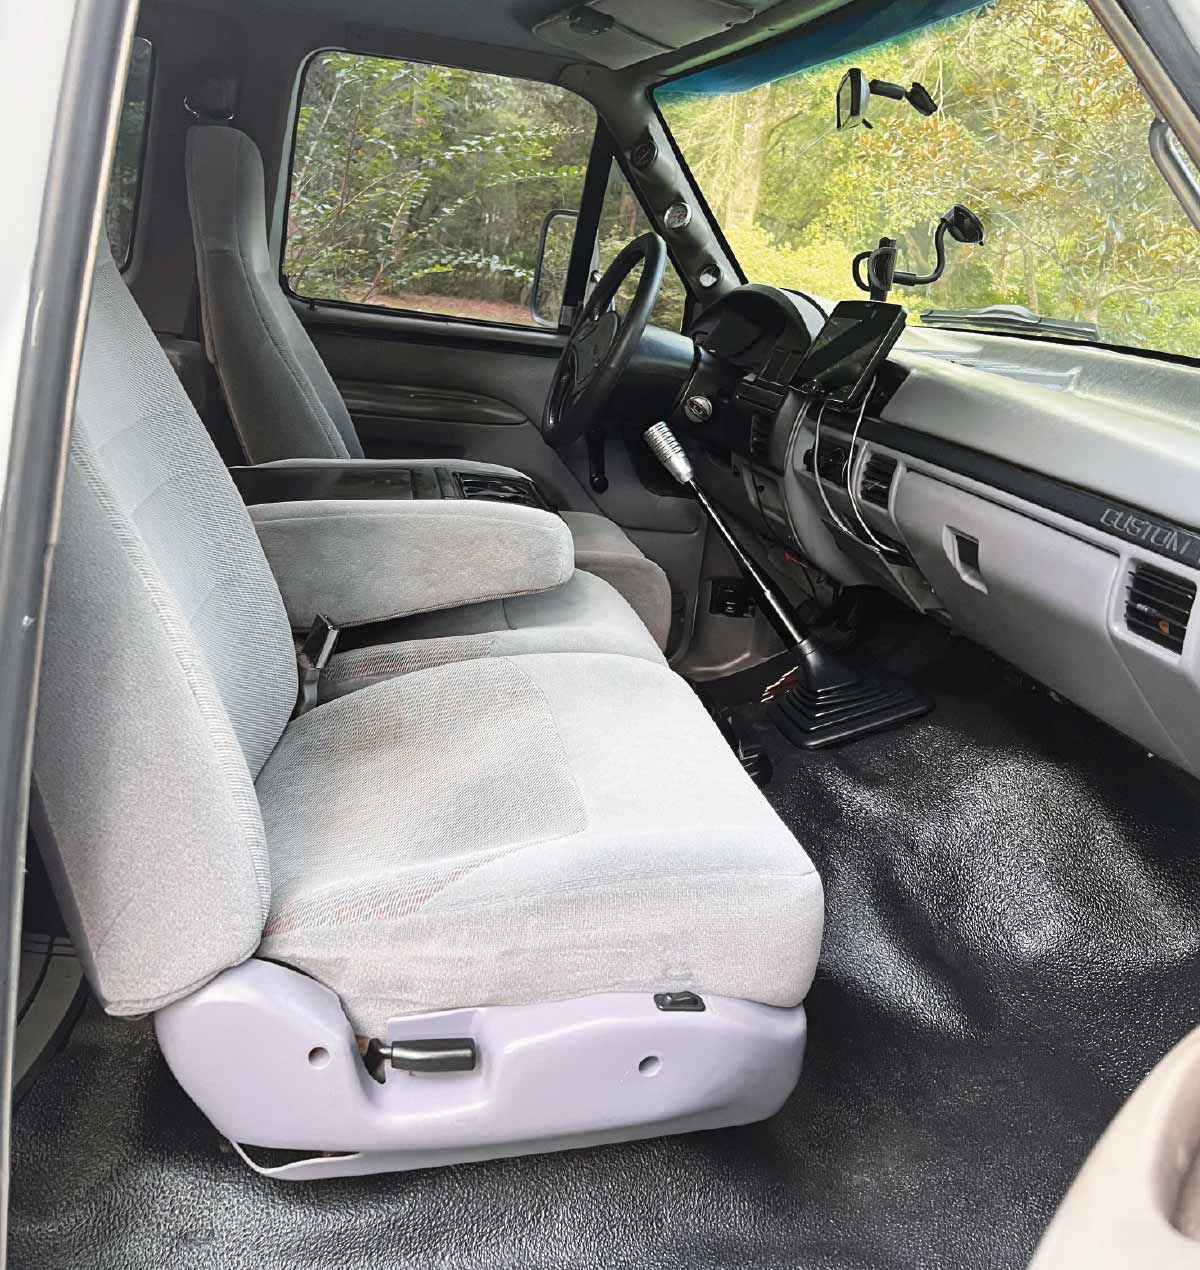 1997 F250 7.3L's seating